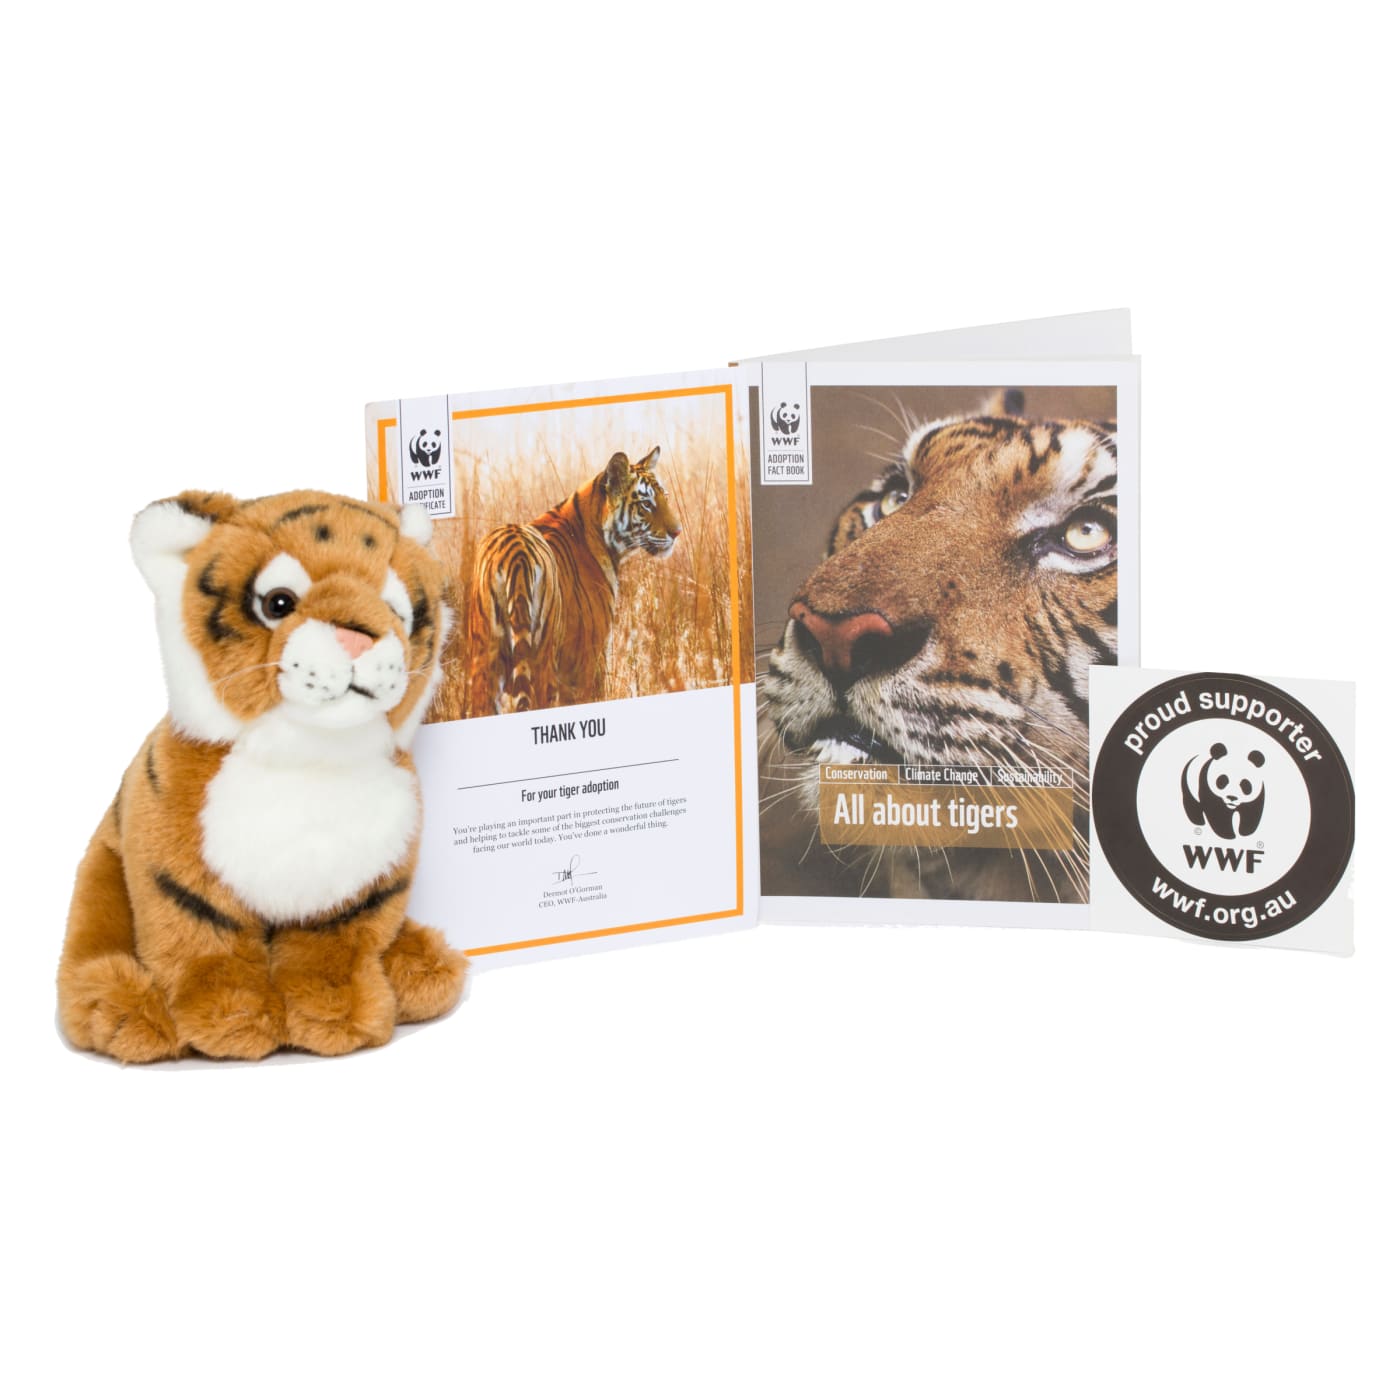 Contents of tiger adoption pack, including tiger plushie, adoption certificate and tiger booklet